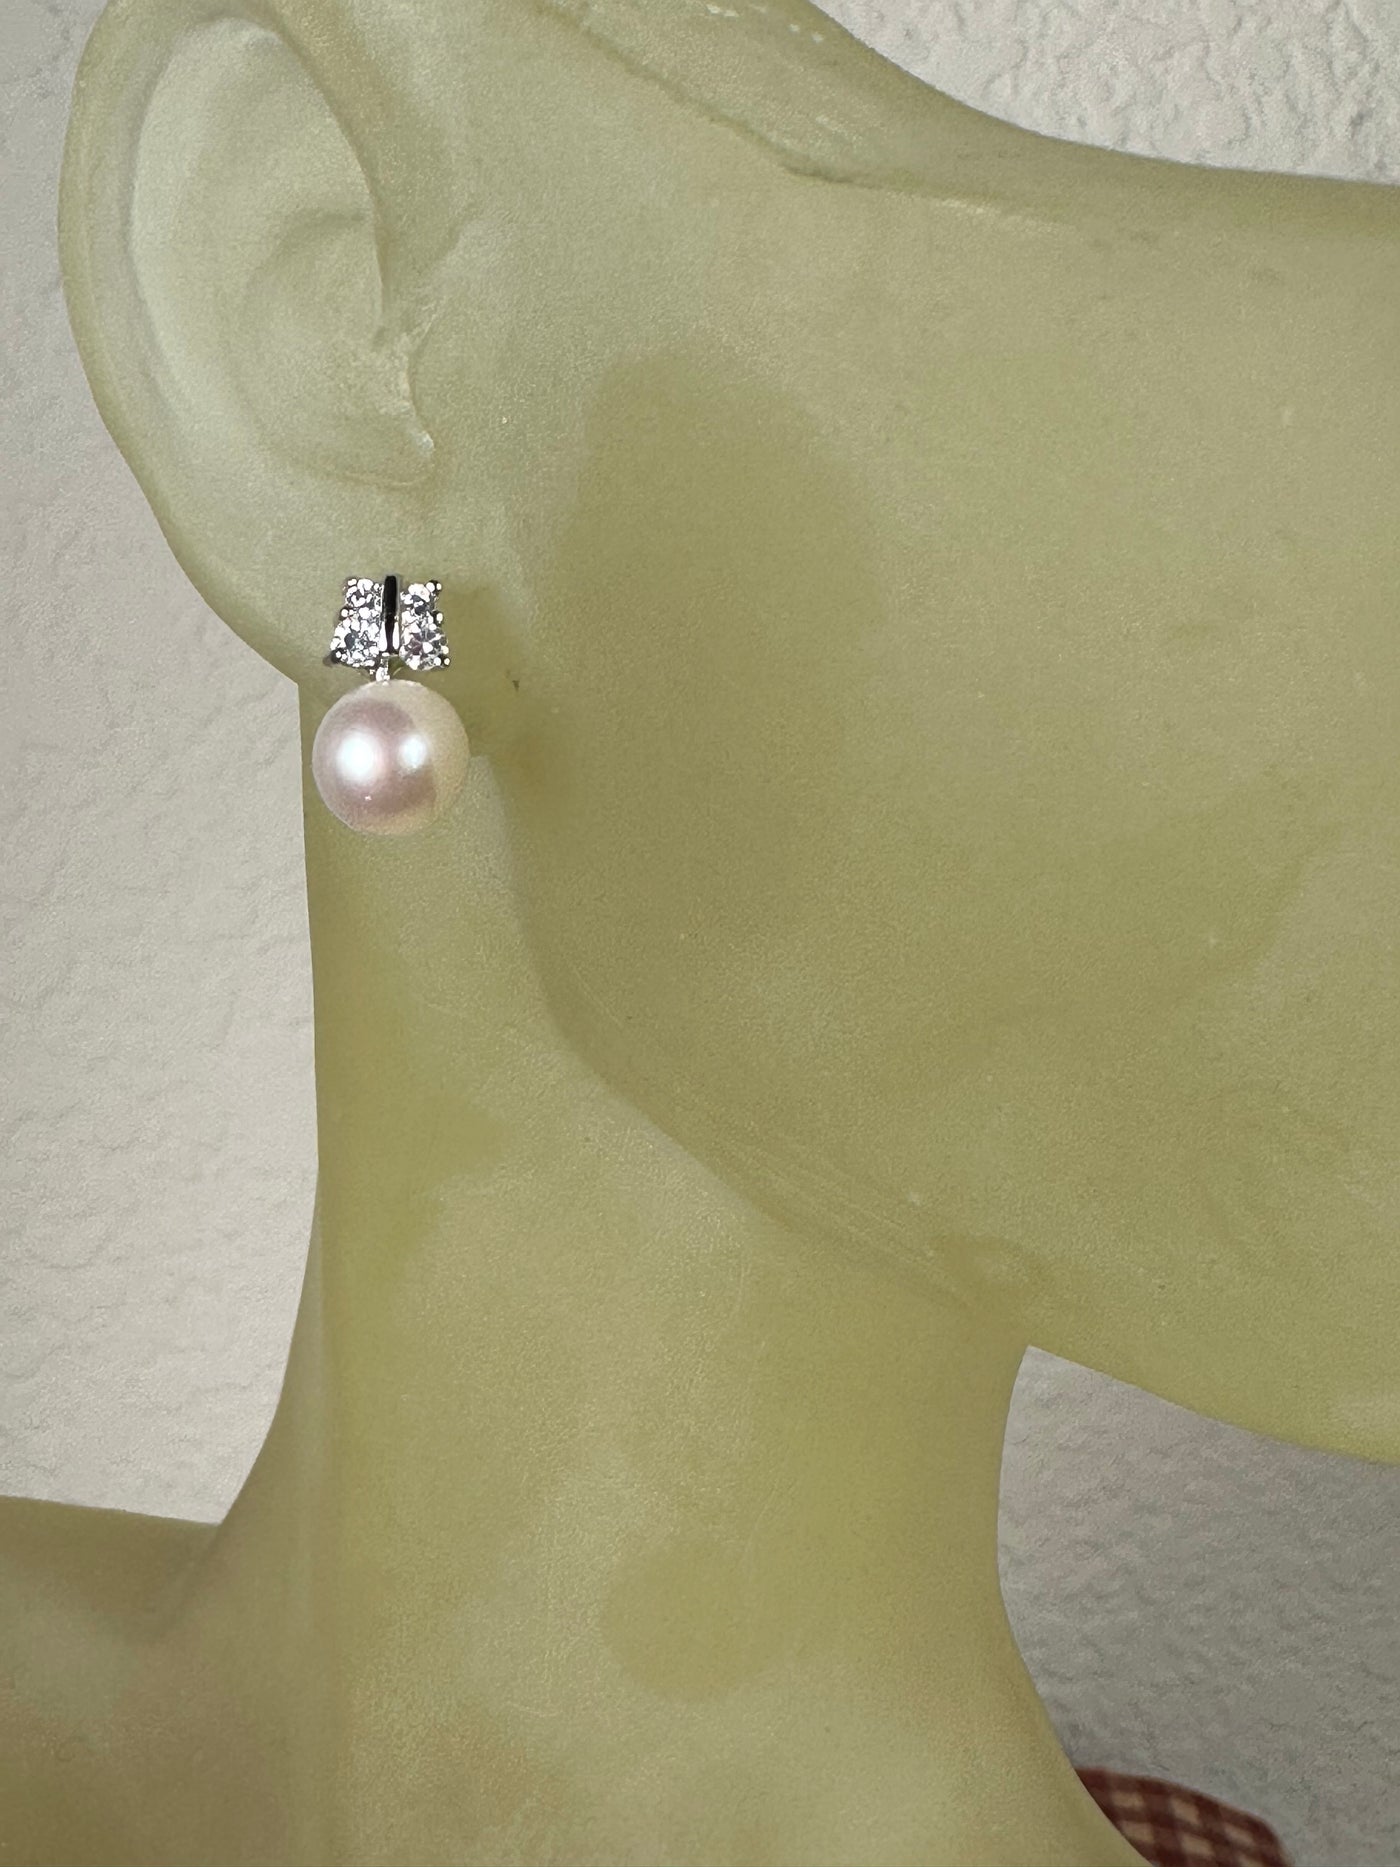 Genuine Pearl and 4 CZs Stud Earrings in Sterling Silver